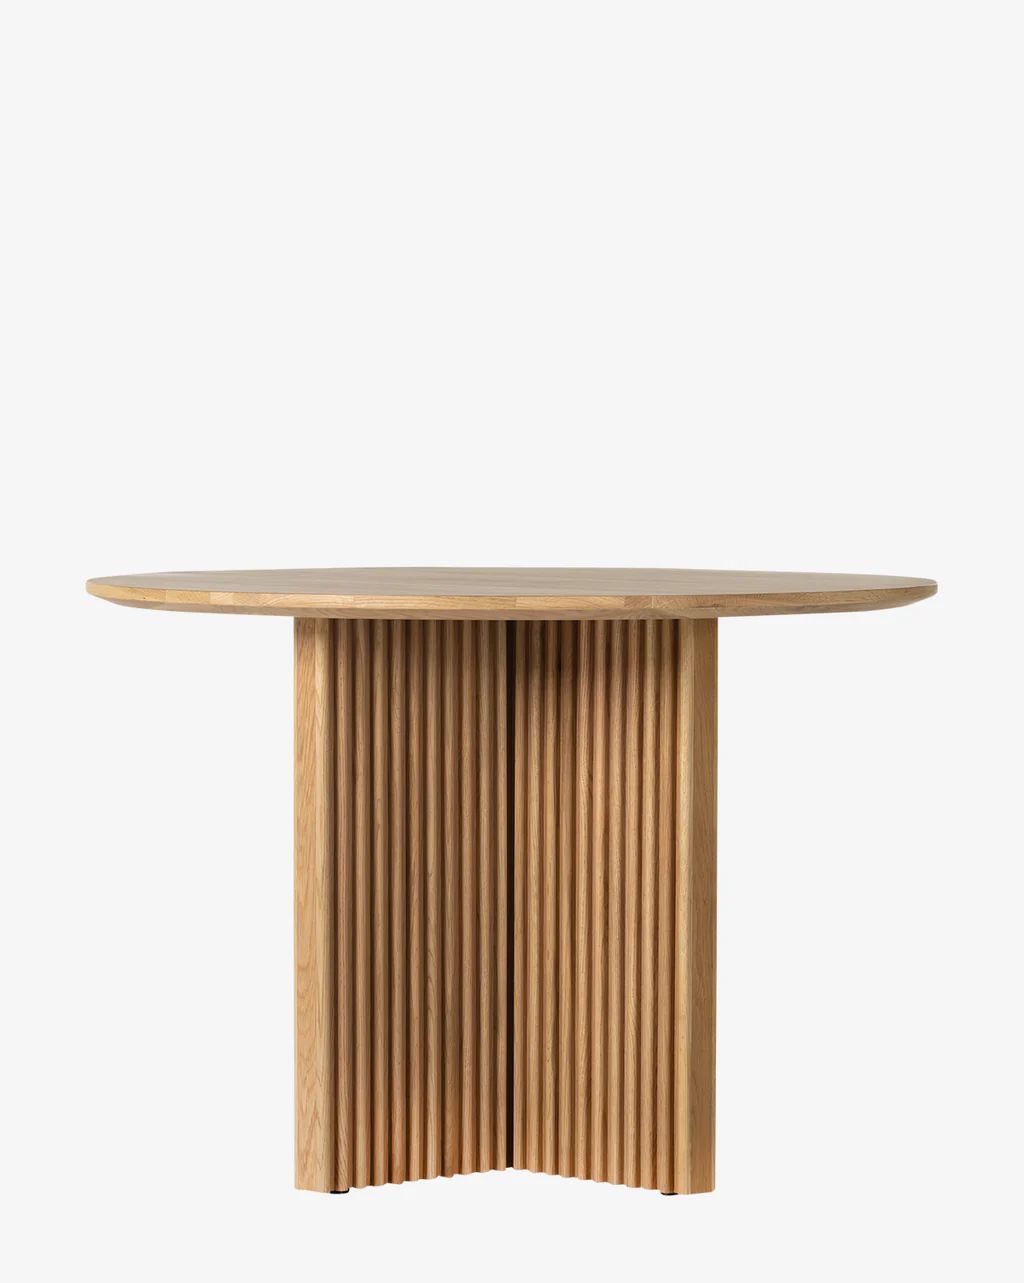 Gene Dining Table | McGee & Co.